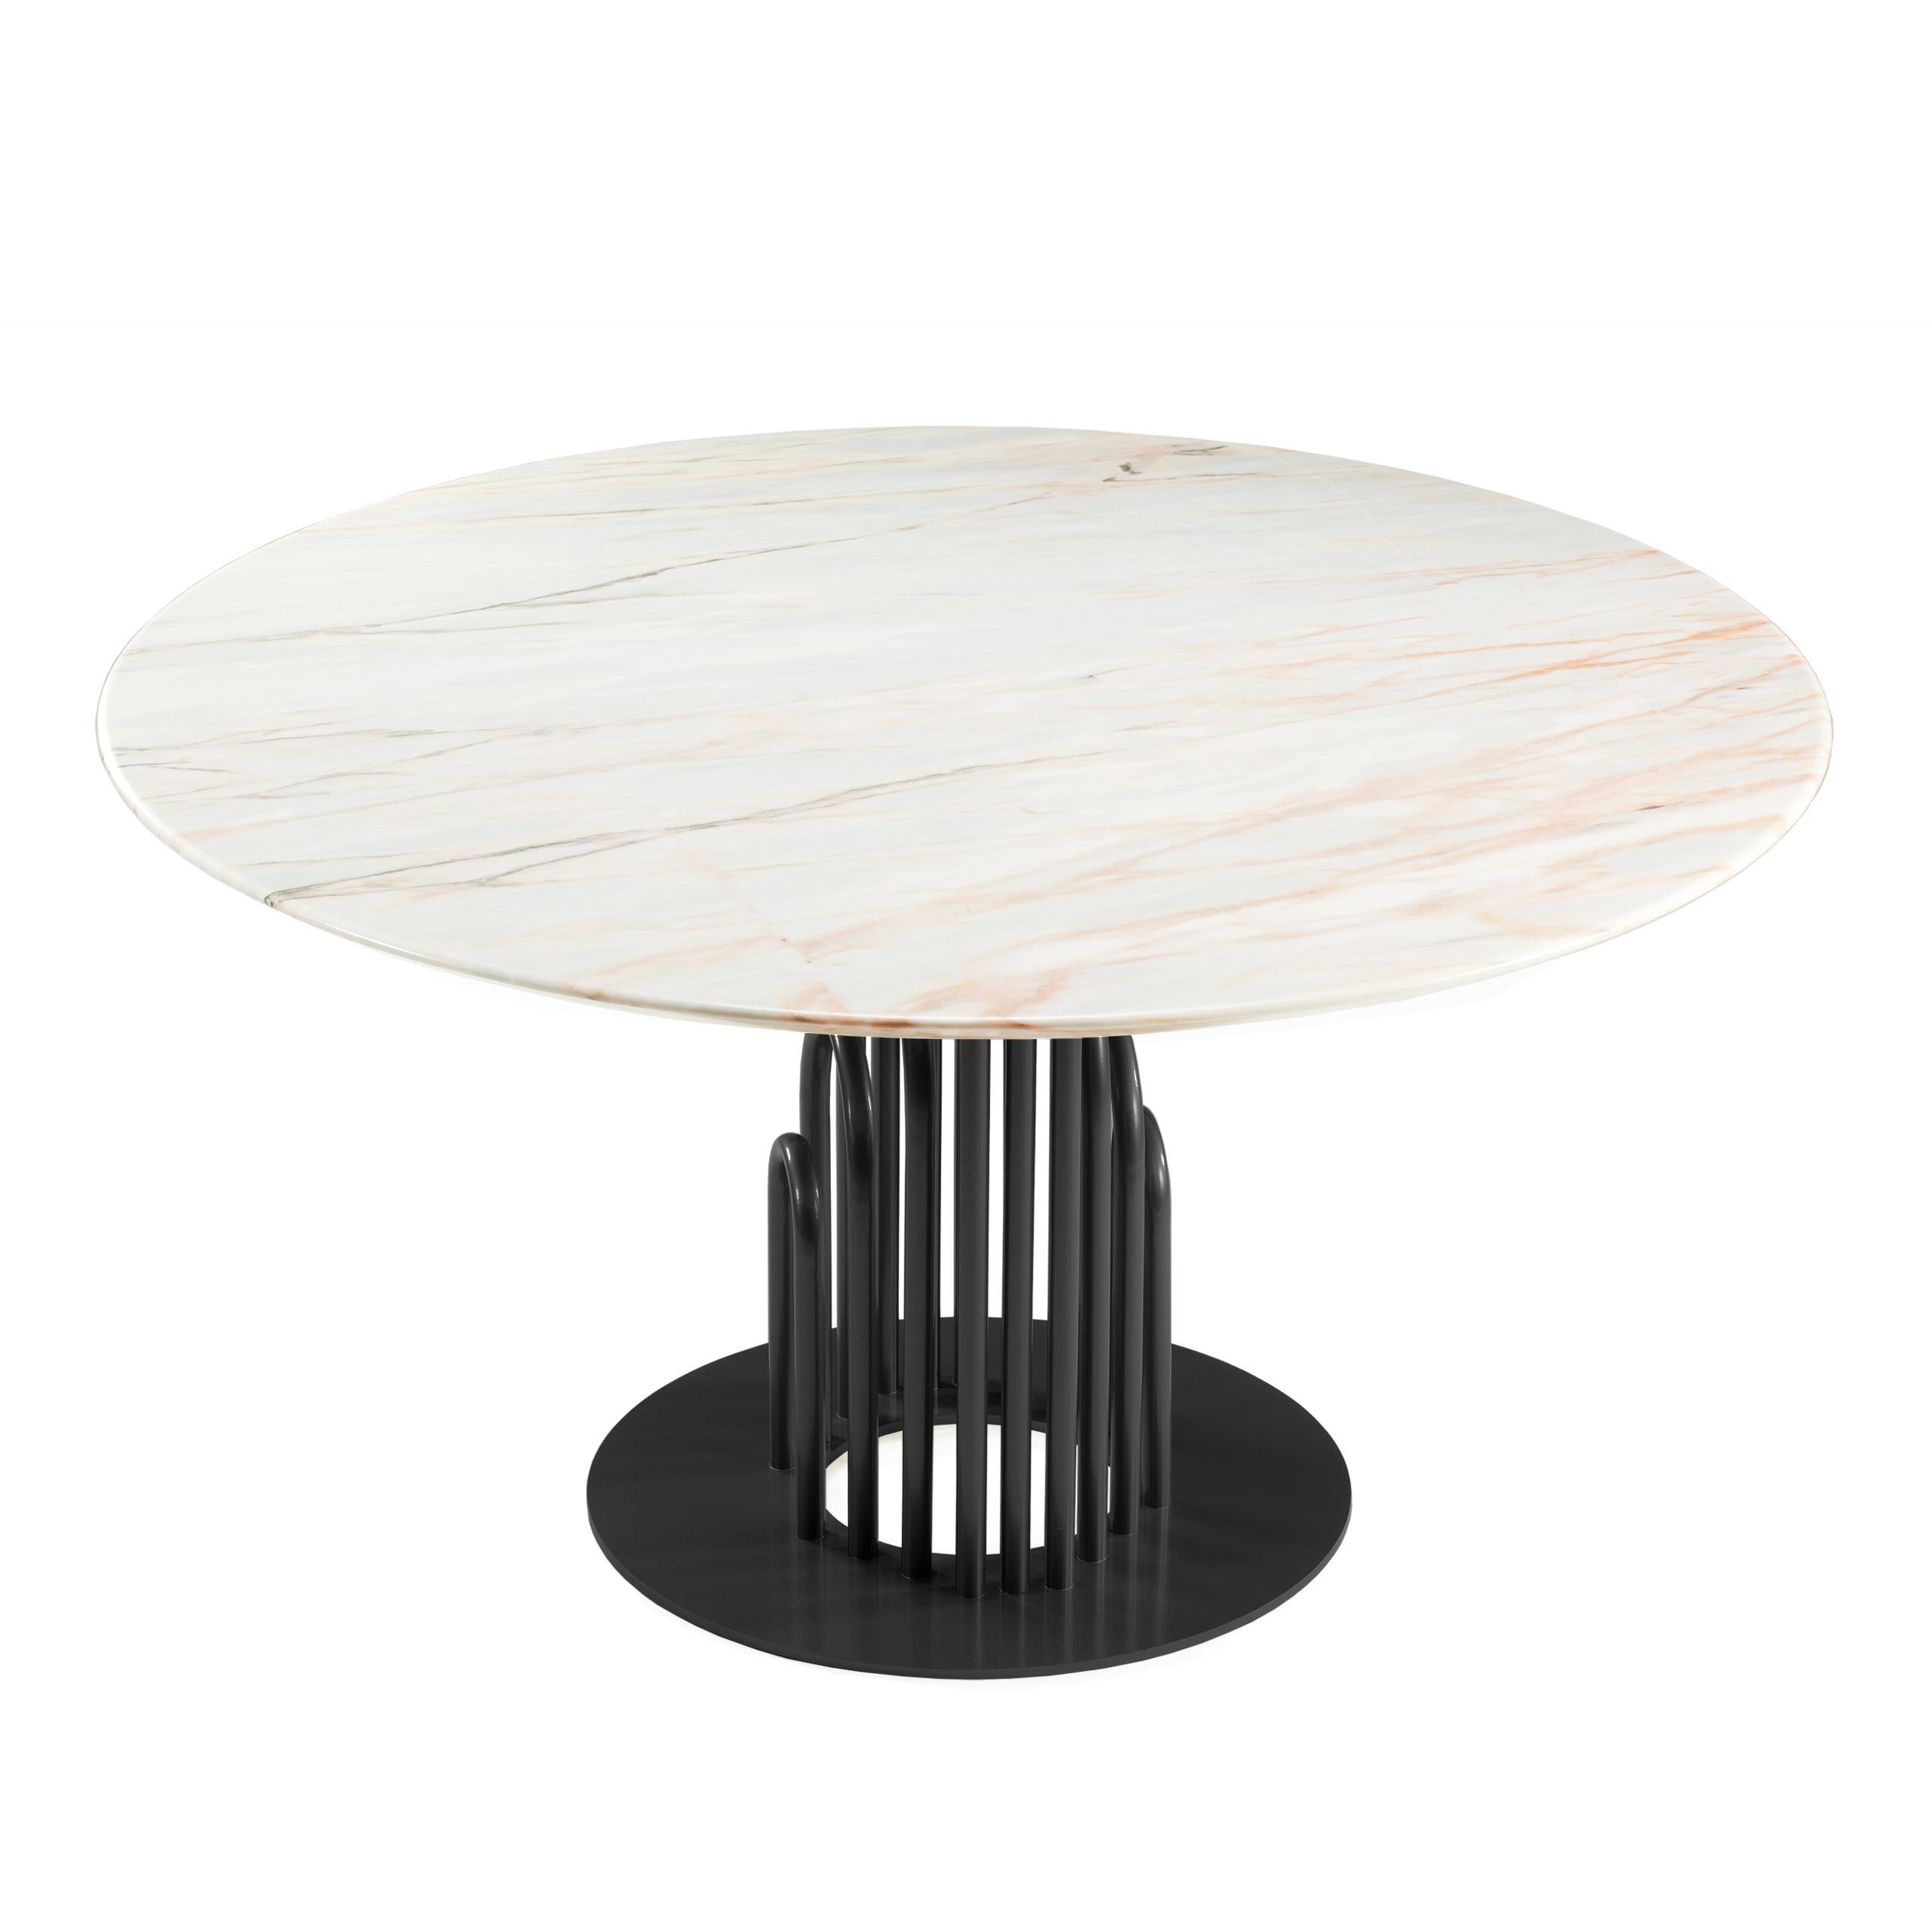 Bara is a sophisticated and unique dinner table that perfectly couples a complex tubular lacquered metal base with a simple but beautiful Estremoz marble top, inspired by the lines of Art Nouveau. It definitely is an expression of elegance and